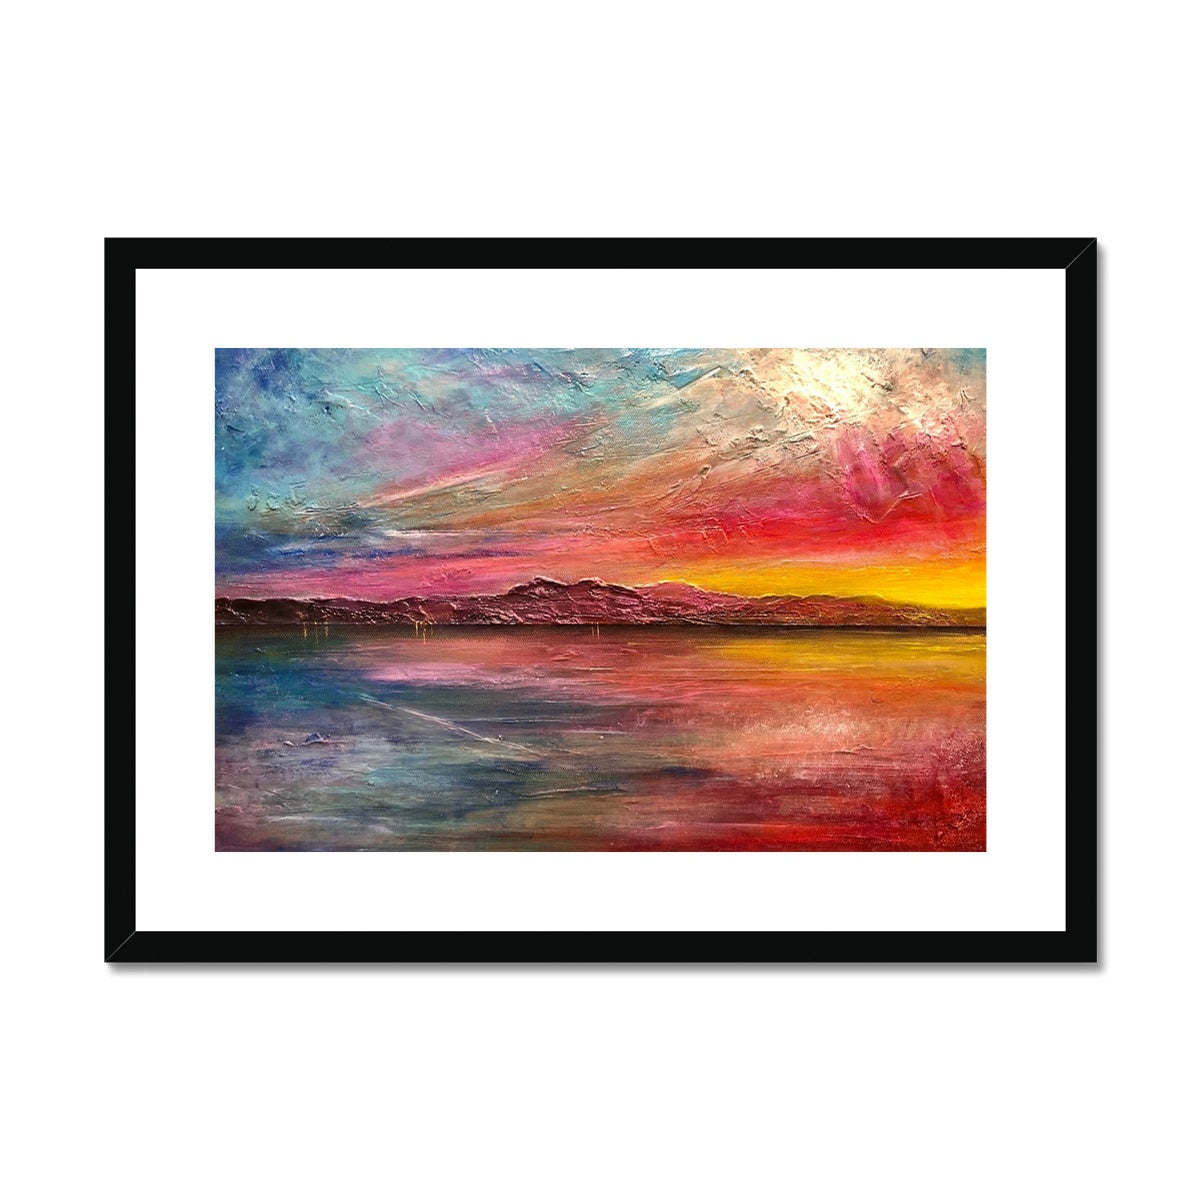 Arran Sunset ii Painting | Framed & Mounted Prints From Scotland-Framed & Mounted Prints-Arran Art Gallery-A2 Landscape-Black Frame-Paintings, Prints, Homeware, Art Gifts From Scotland By Scottish Artist Kevin Hunter